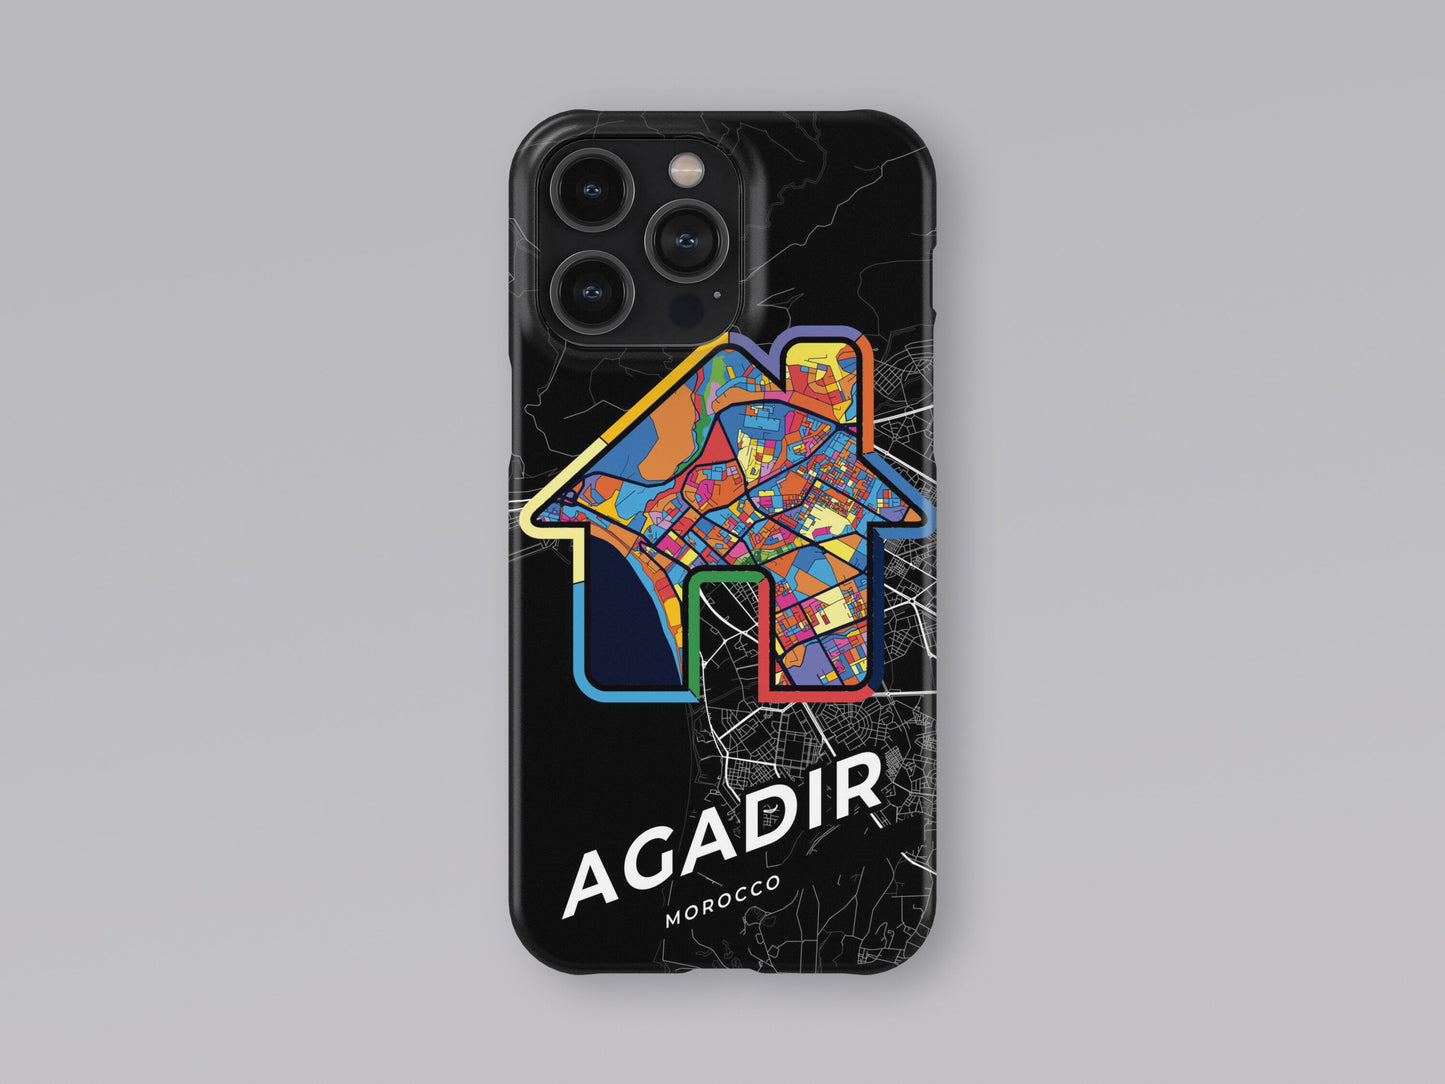 Agadir Morocco slim phone case with colorful icon. Birthday, wedding or housewarming gift. Couple match cases. 3